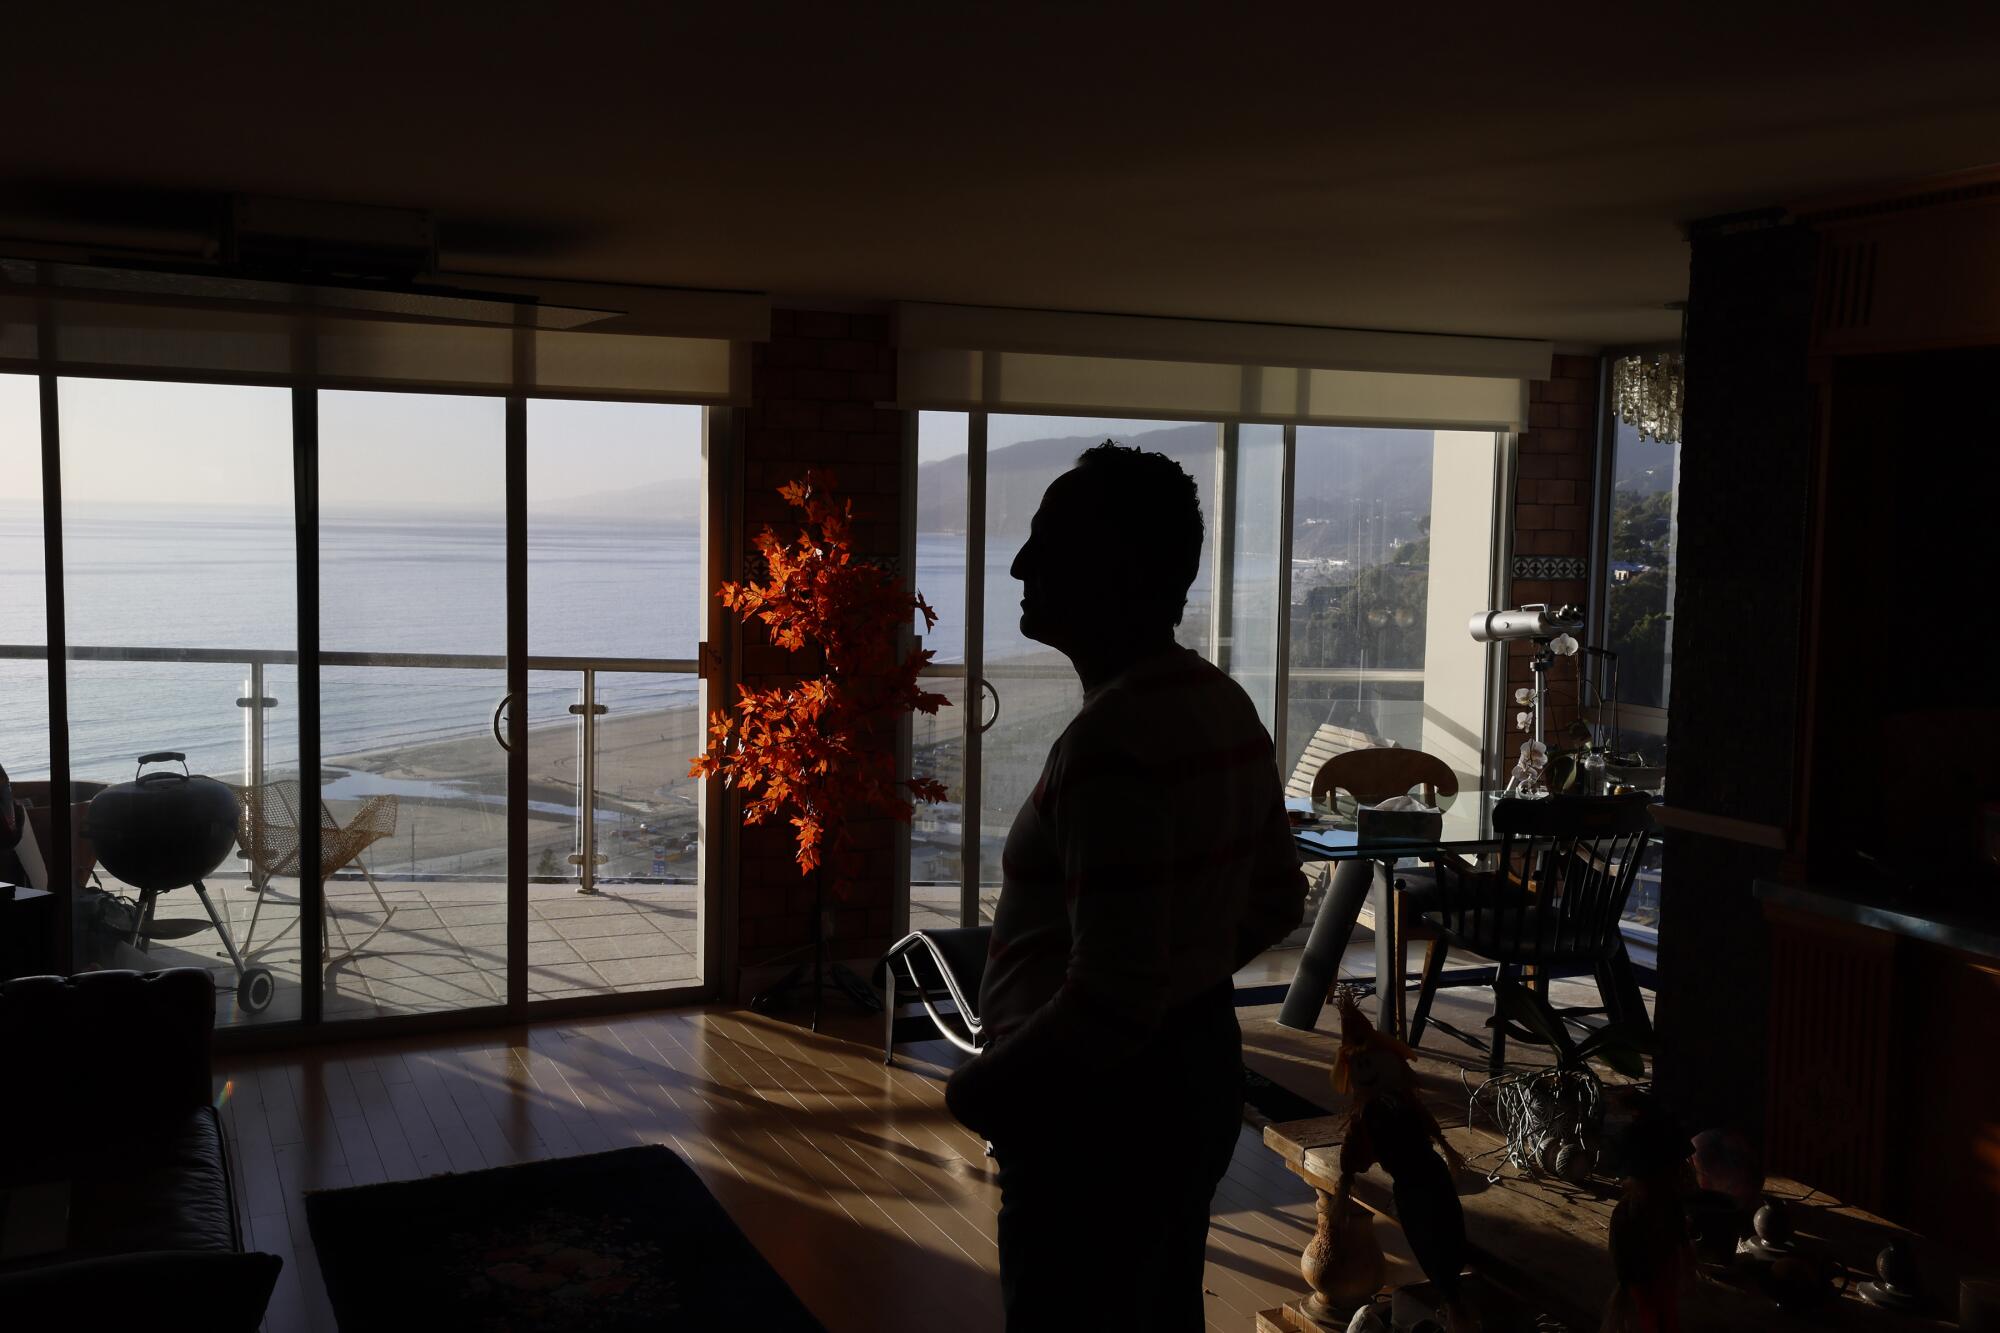 A man is silhouetted in a windowed room with a view of the sea.